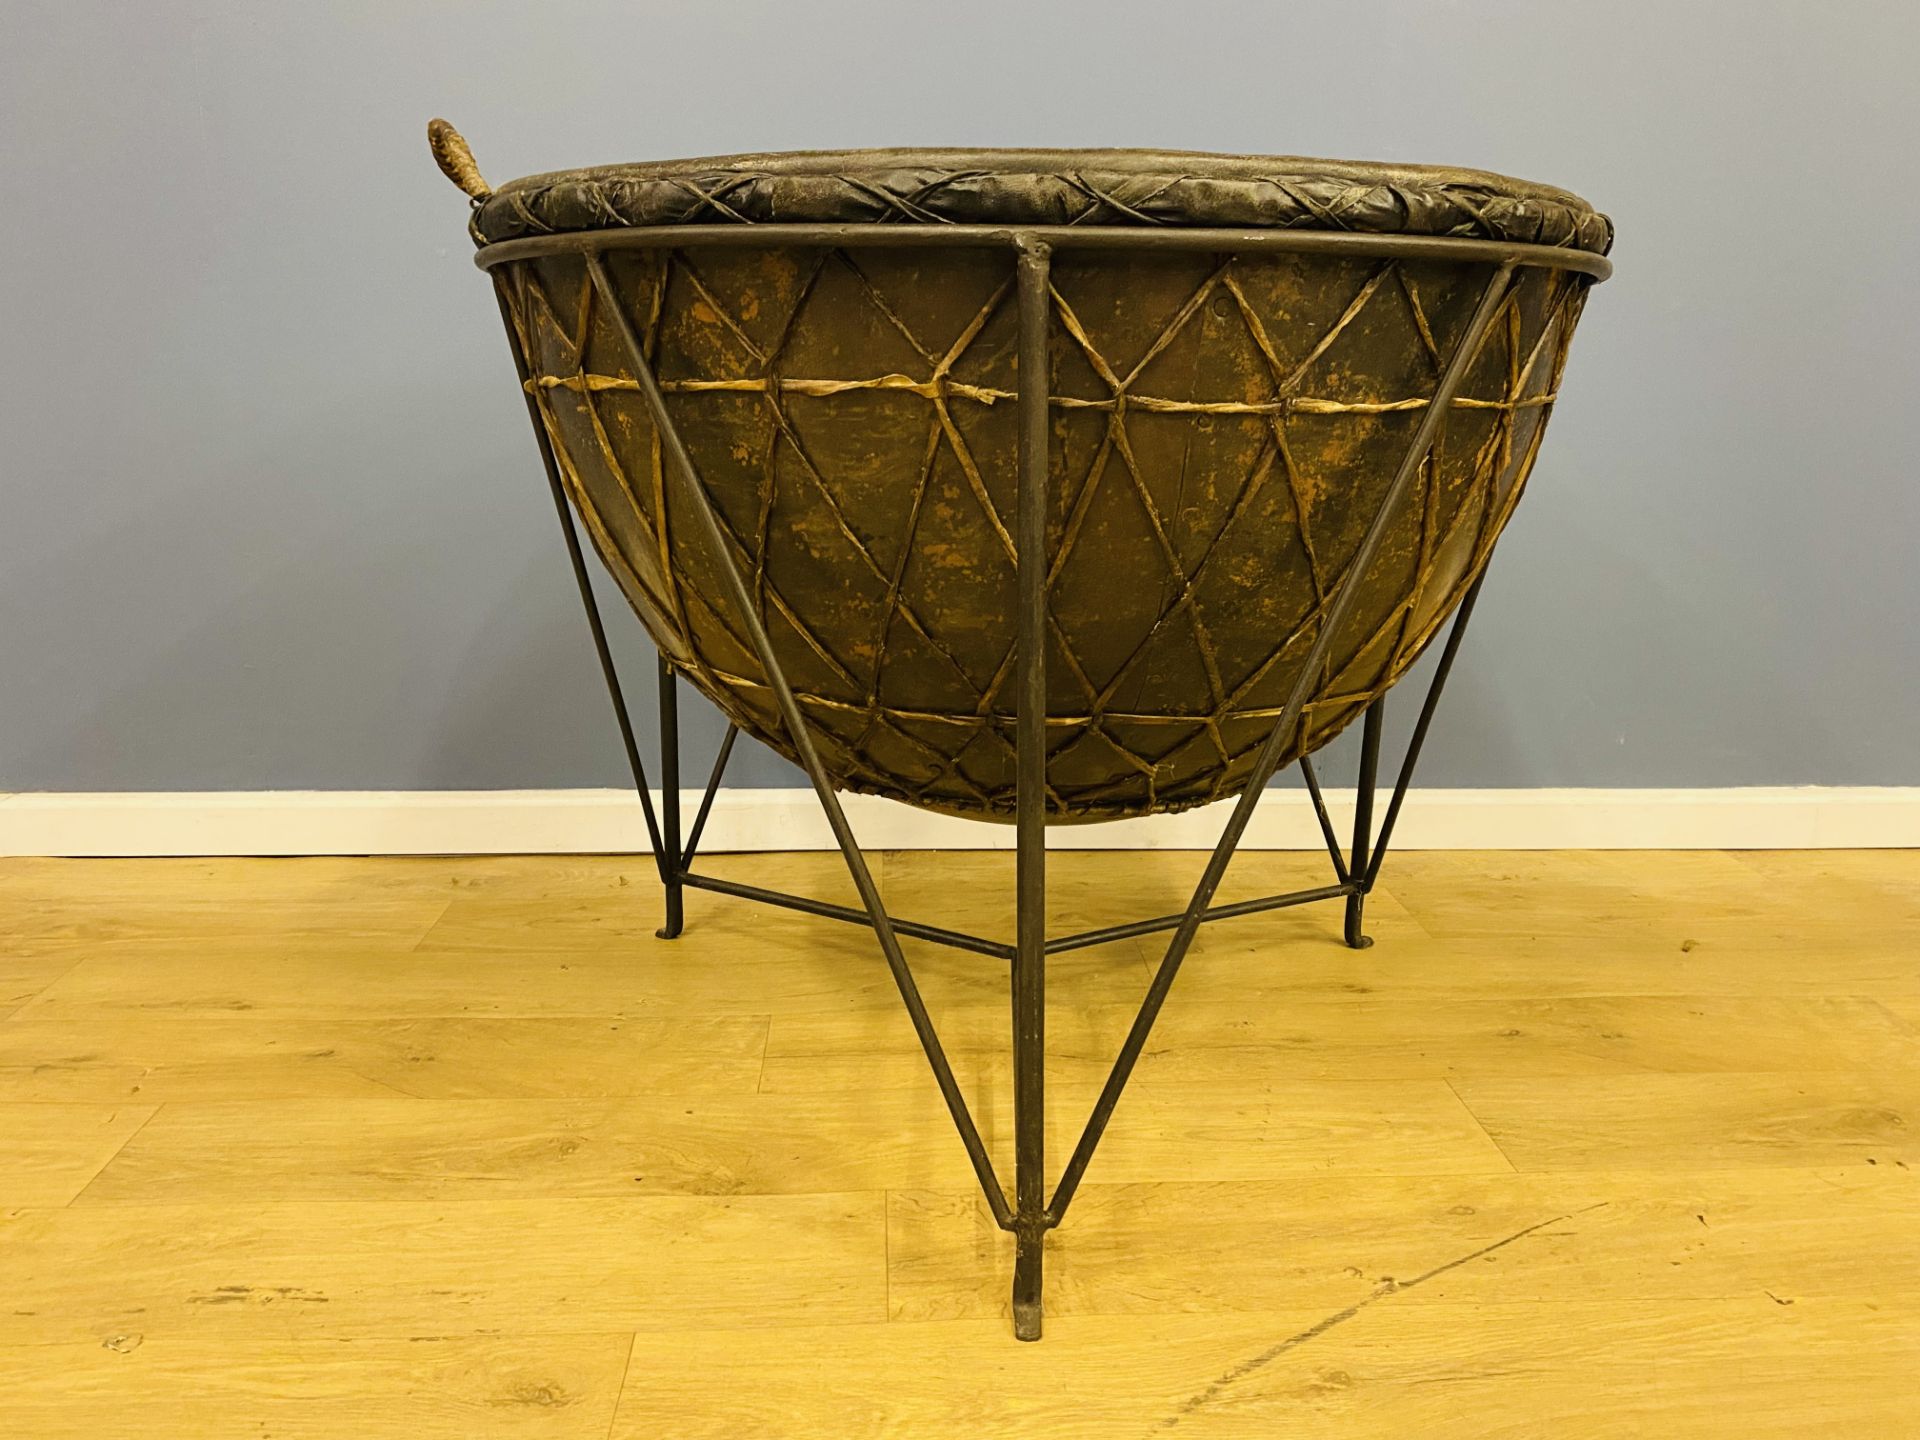 Contemporary African drum on metal stand - Image 5 of 6